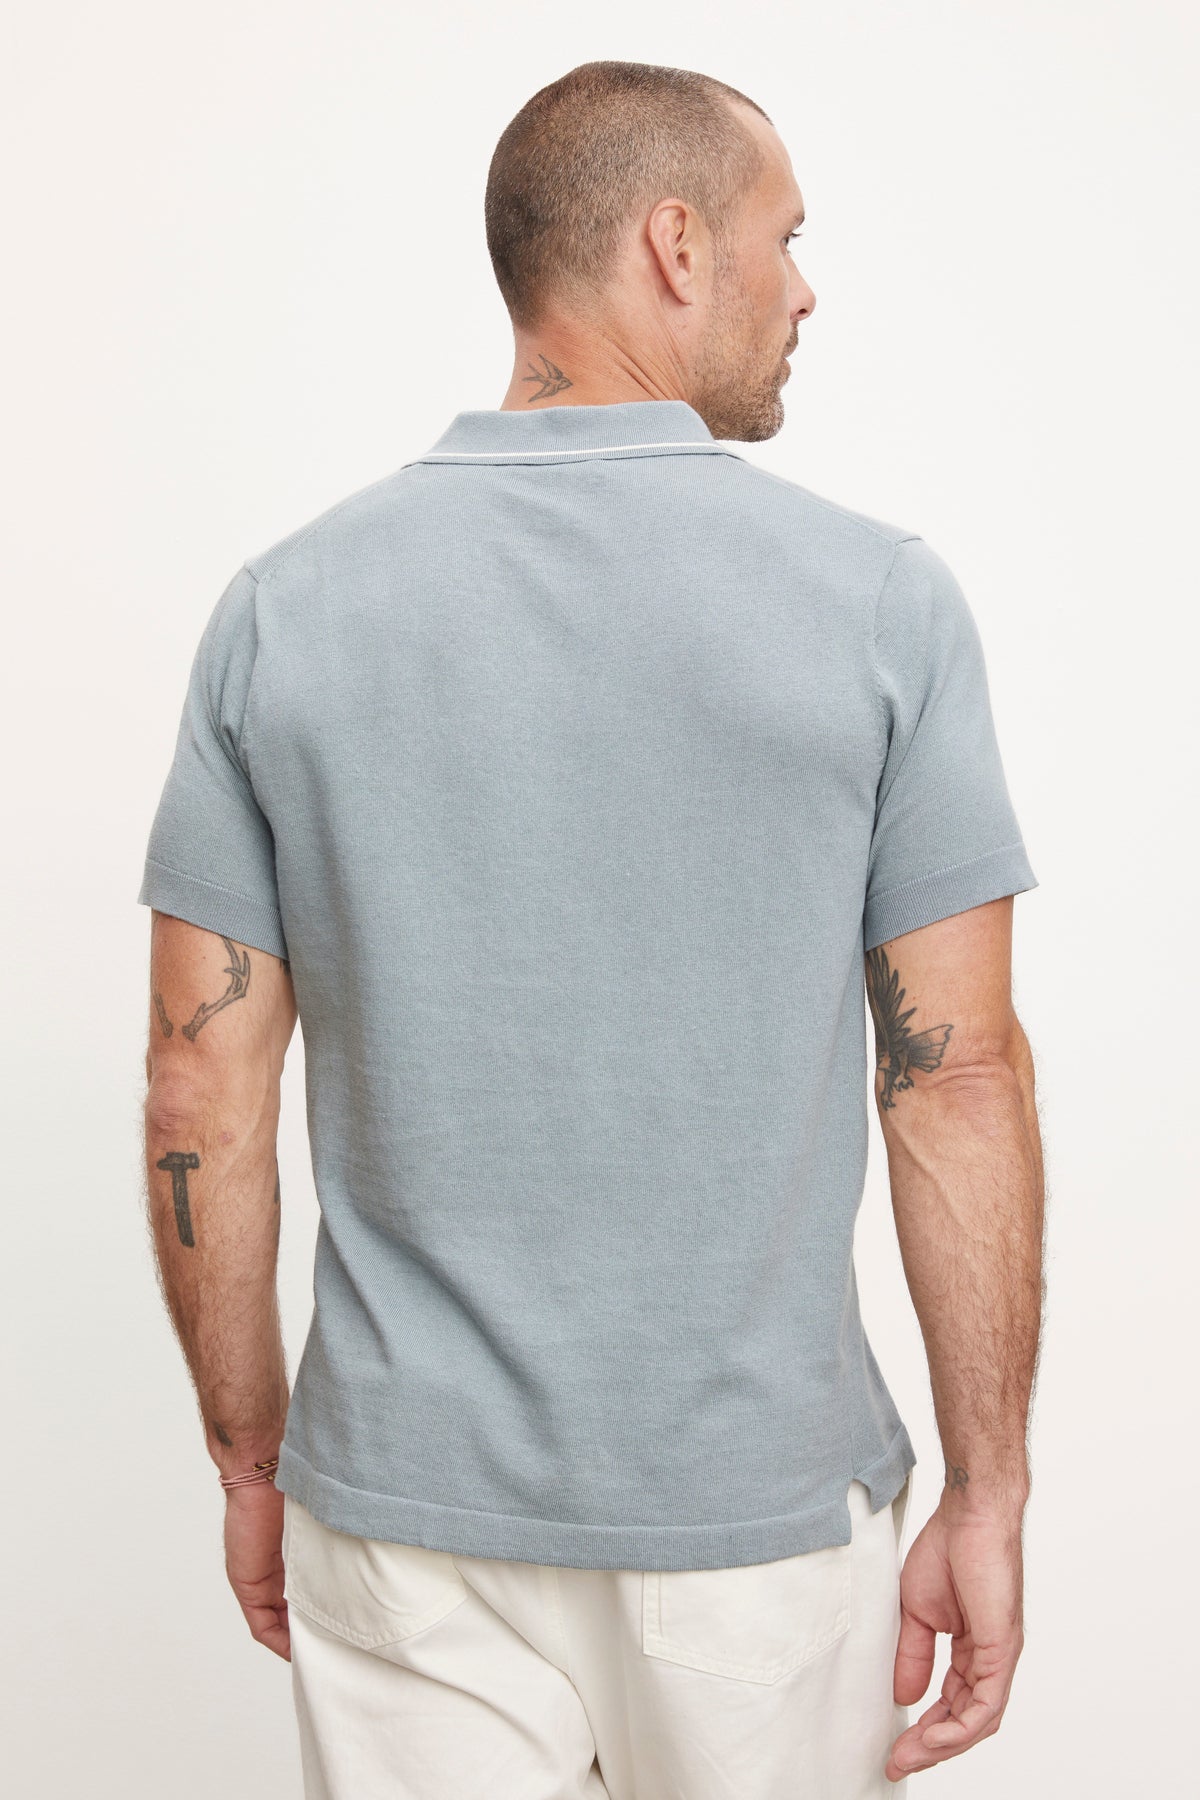 A man viewed from behind, wearing a Velvet by Graham & Spencer Shepard polo shirt in light blue and white pants, with visible tattoos on both arms.-36891061911745